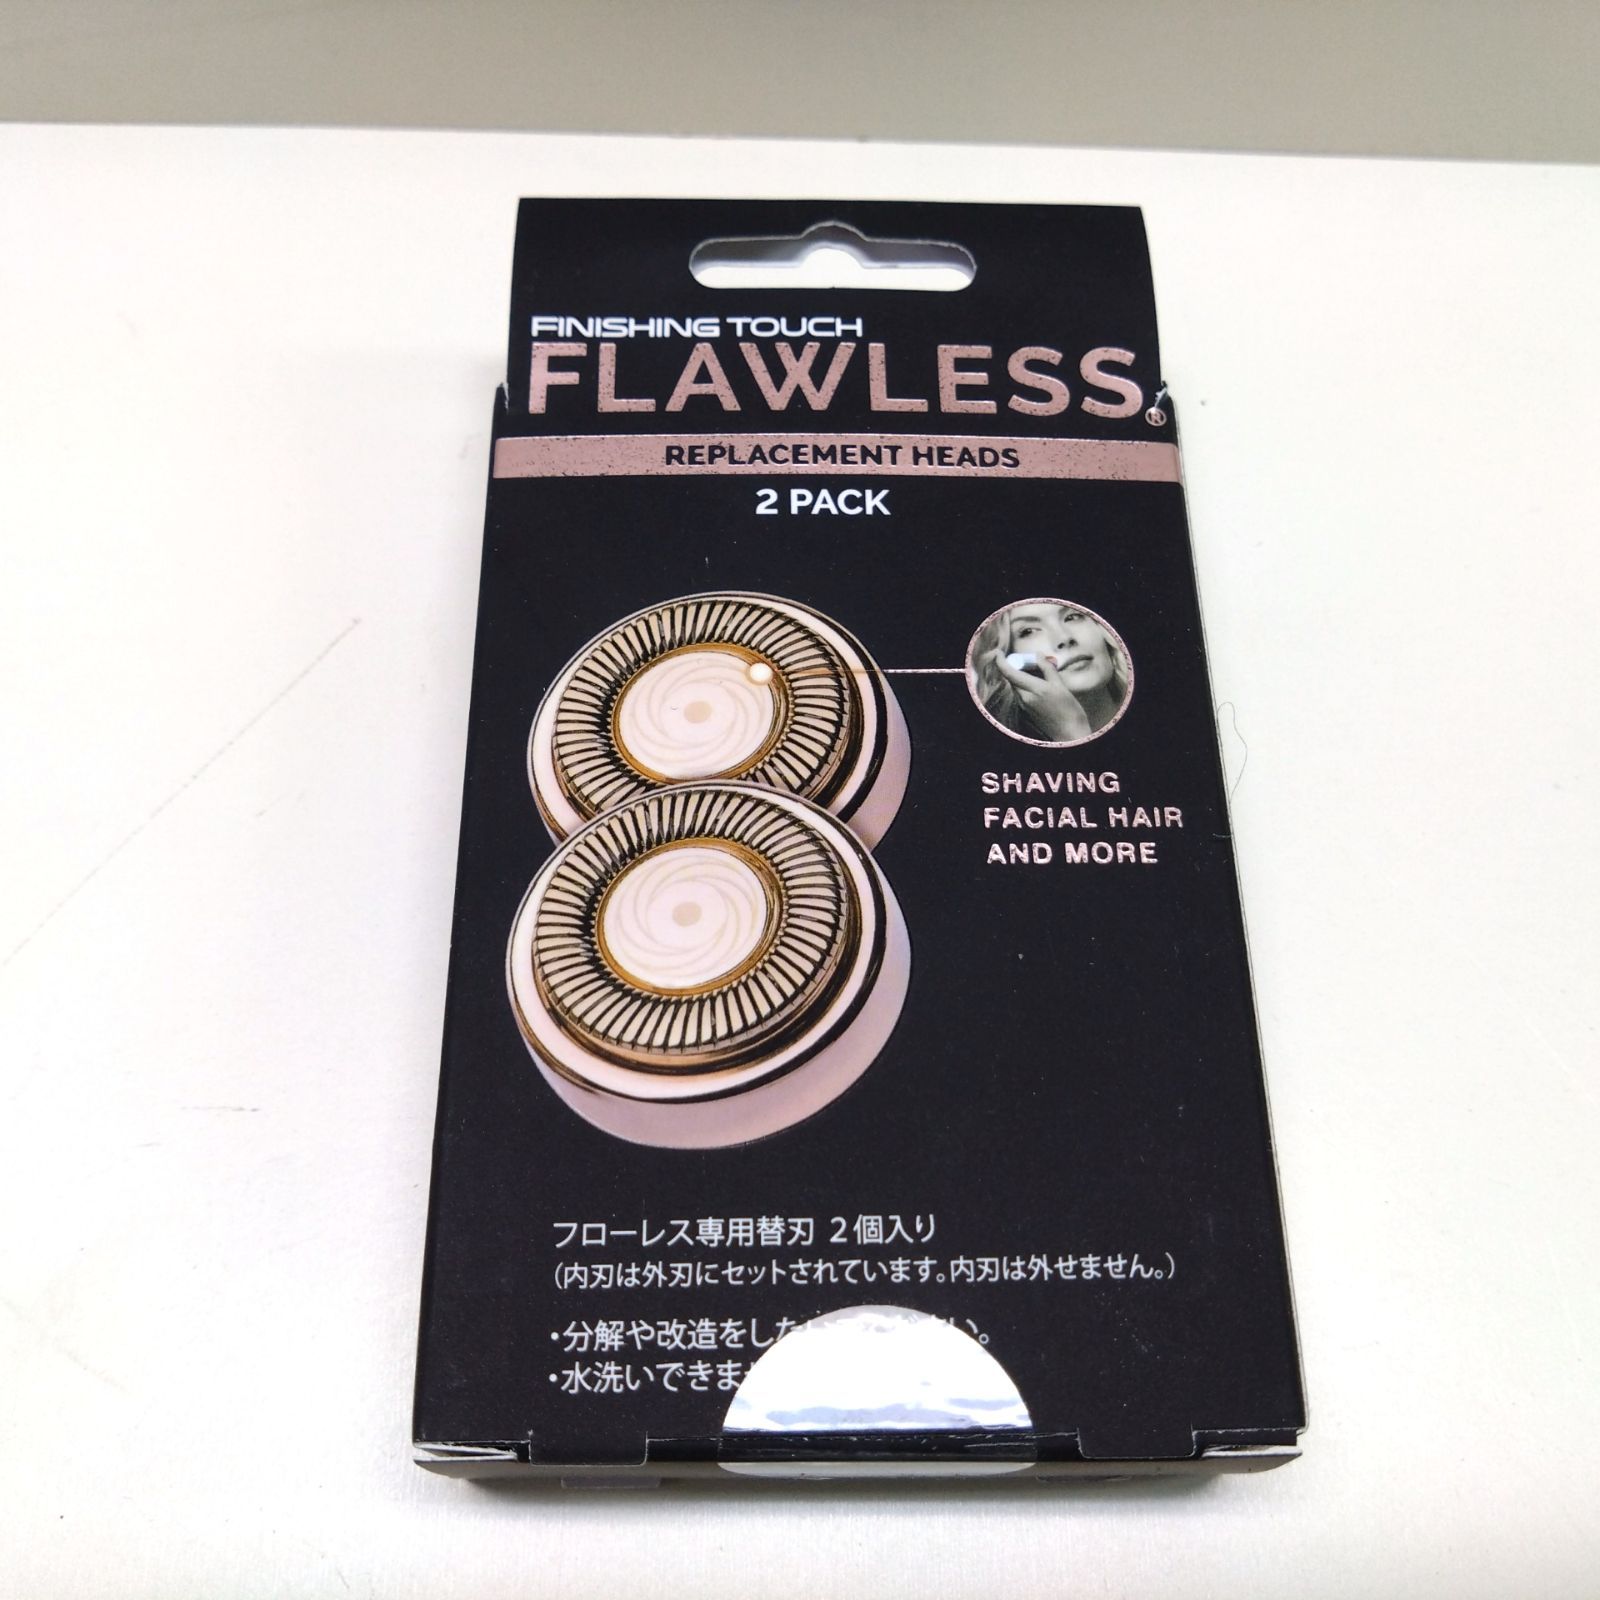 FINISHING TOUCH FLAWLESS フローレス専用替刃 2個入り